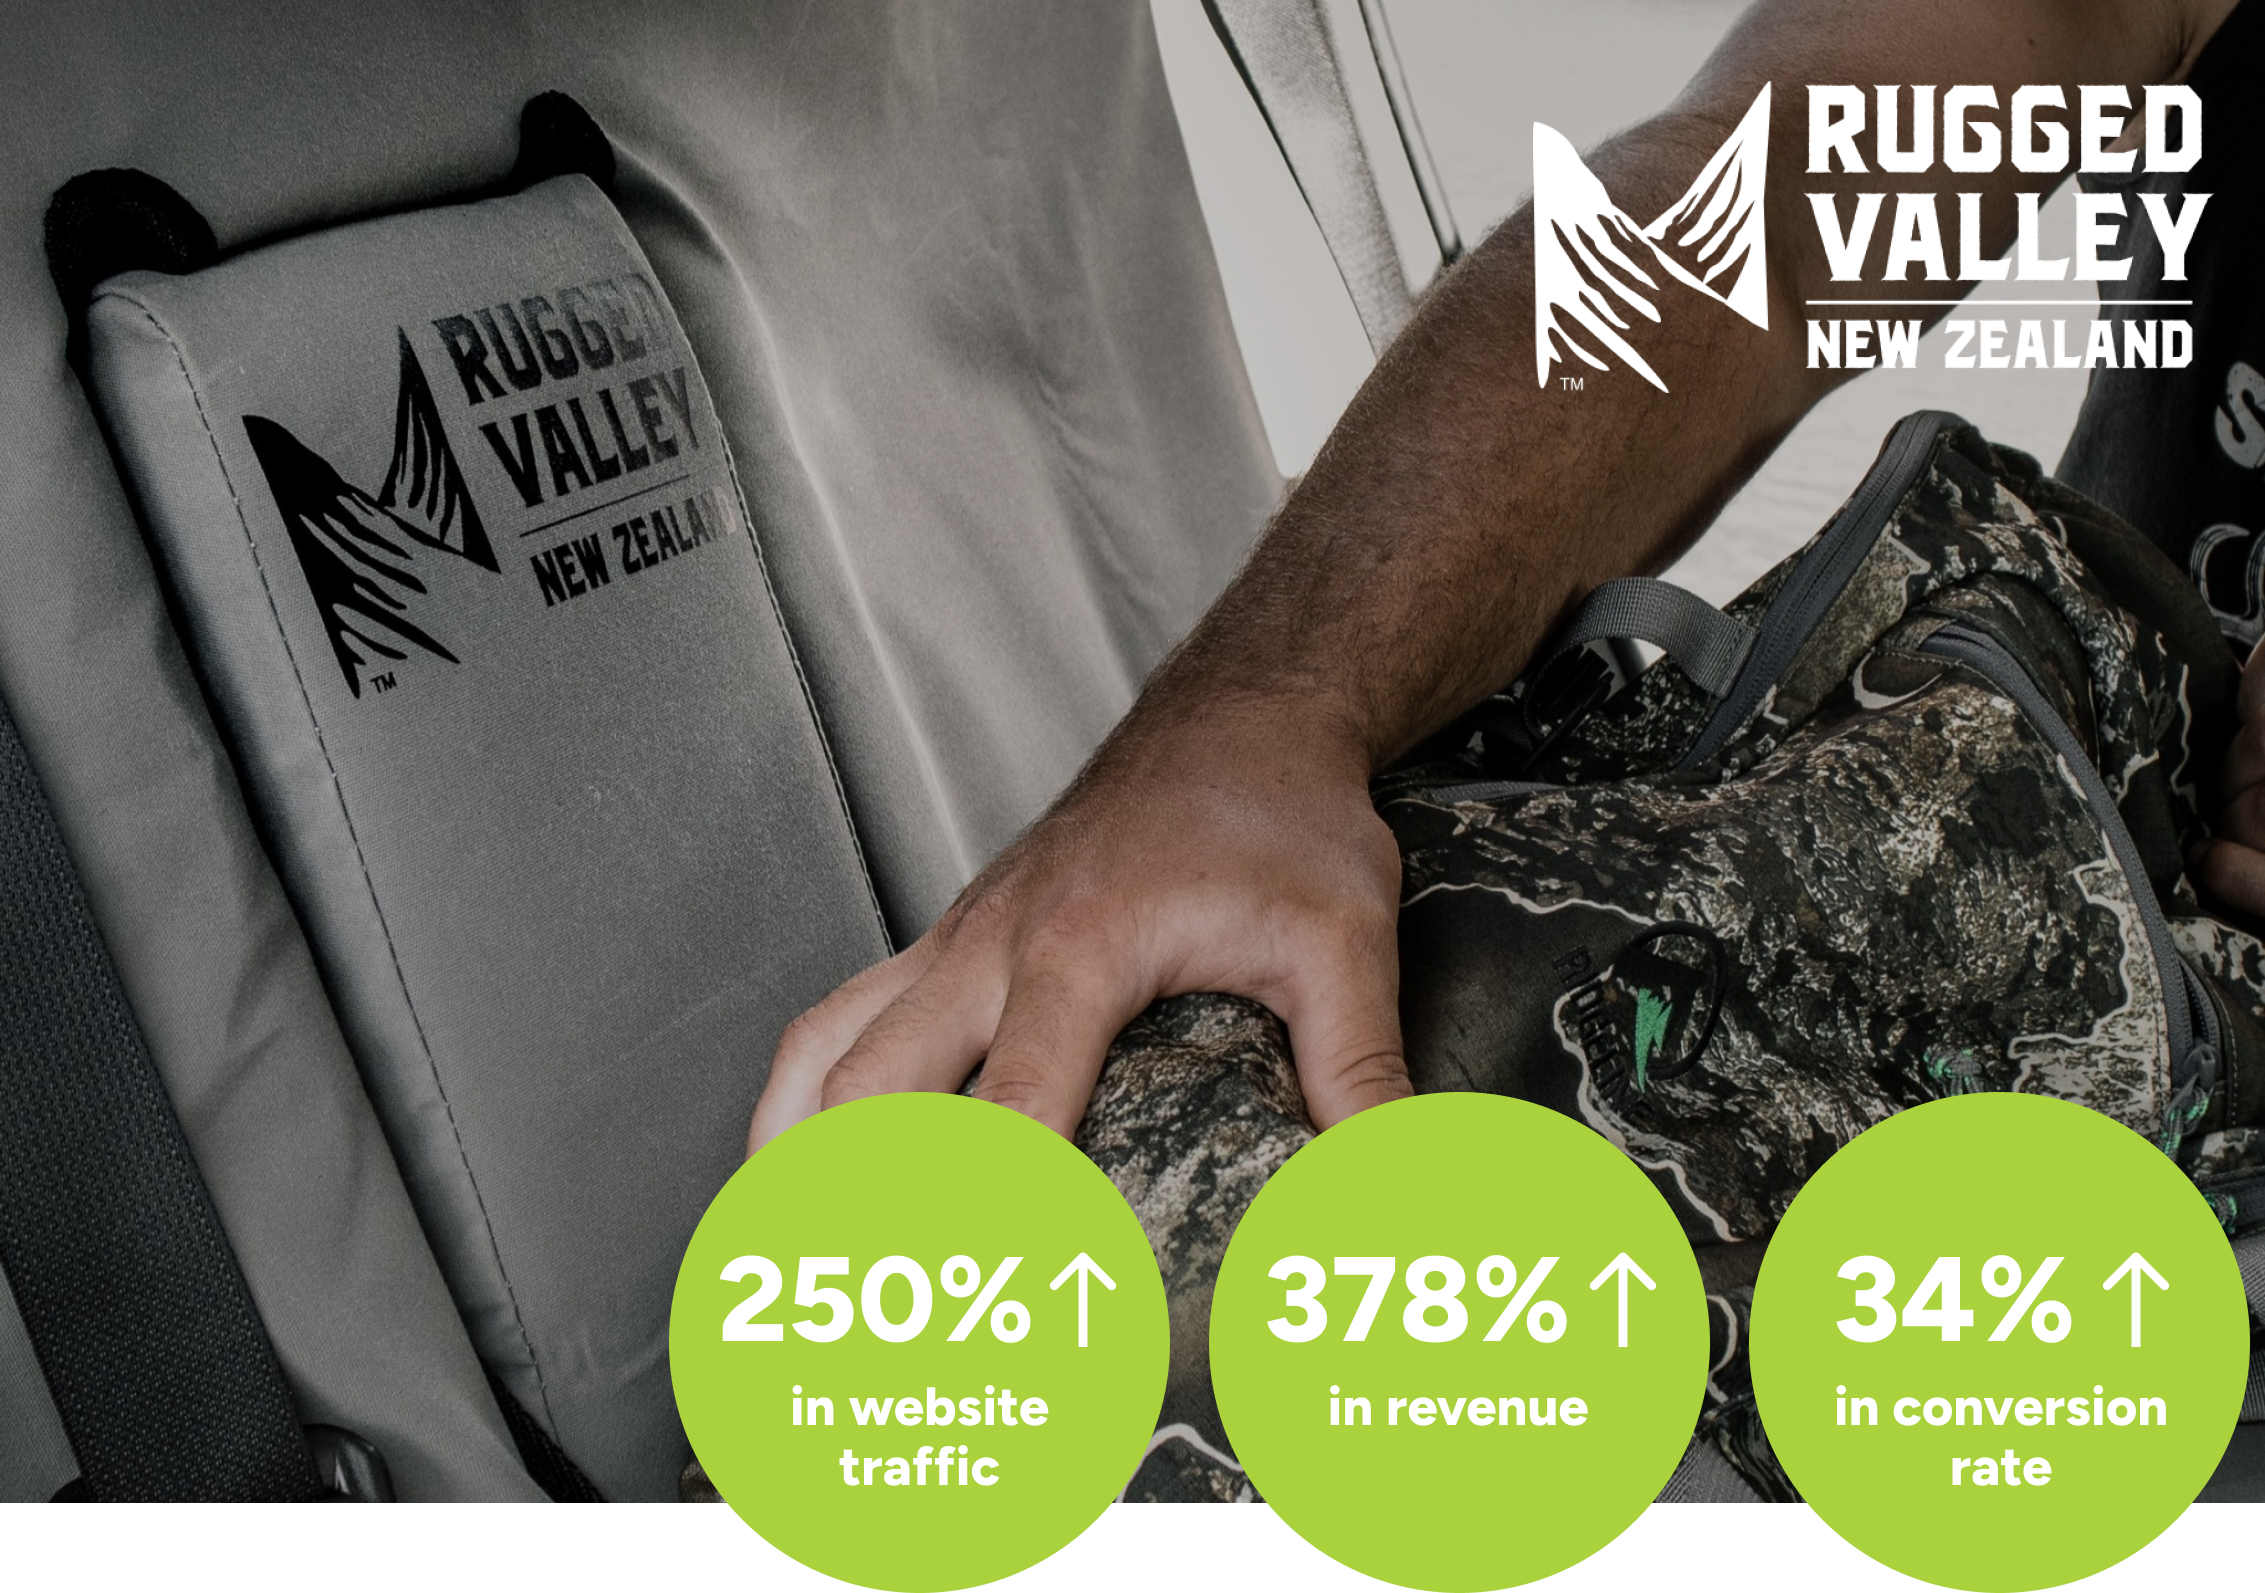 Rugged valley 250% increase 250% in website traffic,378% increase in revenue and 34% increase in conversion rate